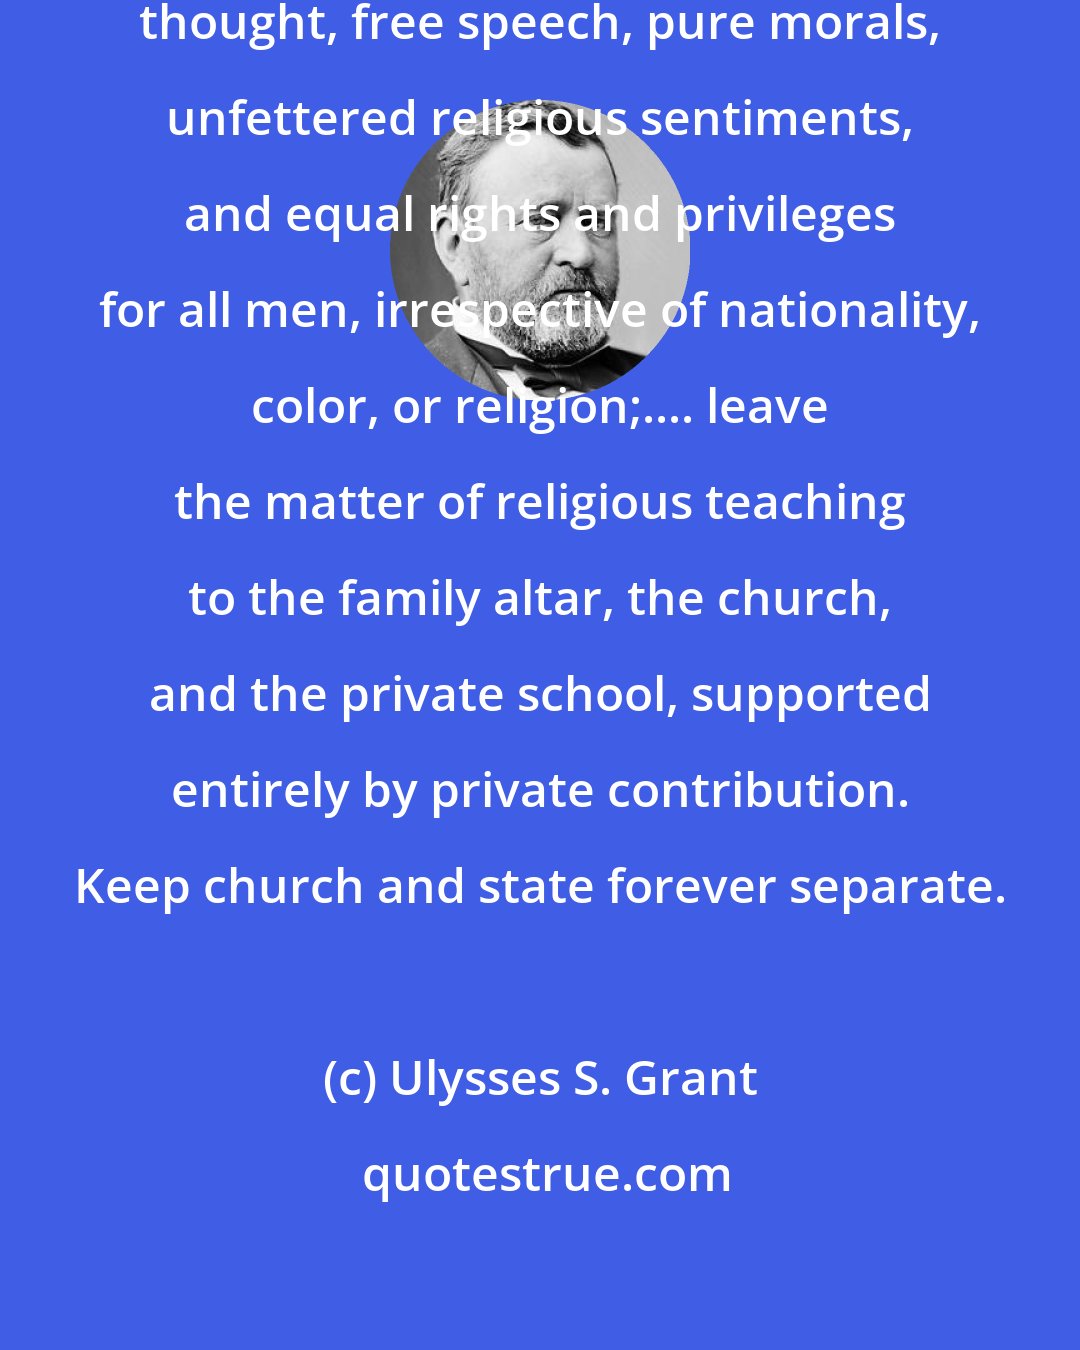 Ulysses S. Grant: Let us labor for the security of free thought, free speech, pure morals, unfettered religious sentiments, and equal rights and privileges for all men, irrespective of nationality, color, or religion;.... leave the matter of religious teaching to the family altar, the church, and the private school, supported entirely by private contribution. Keep church and state forever separate.